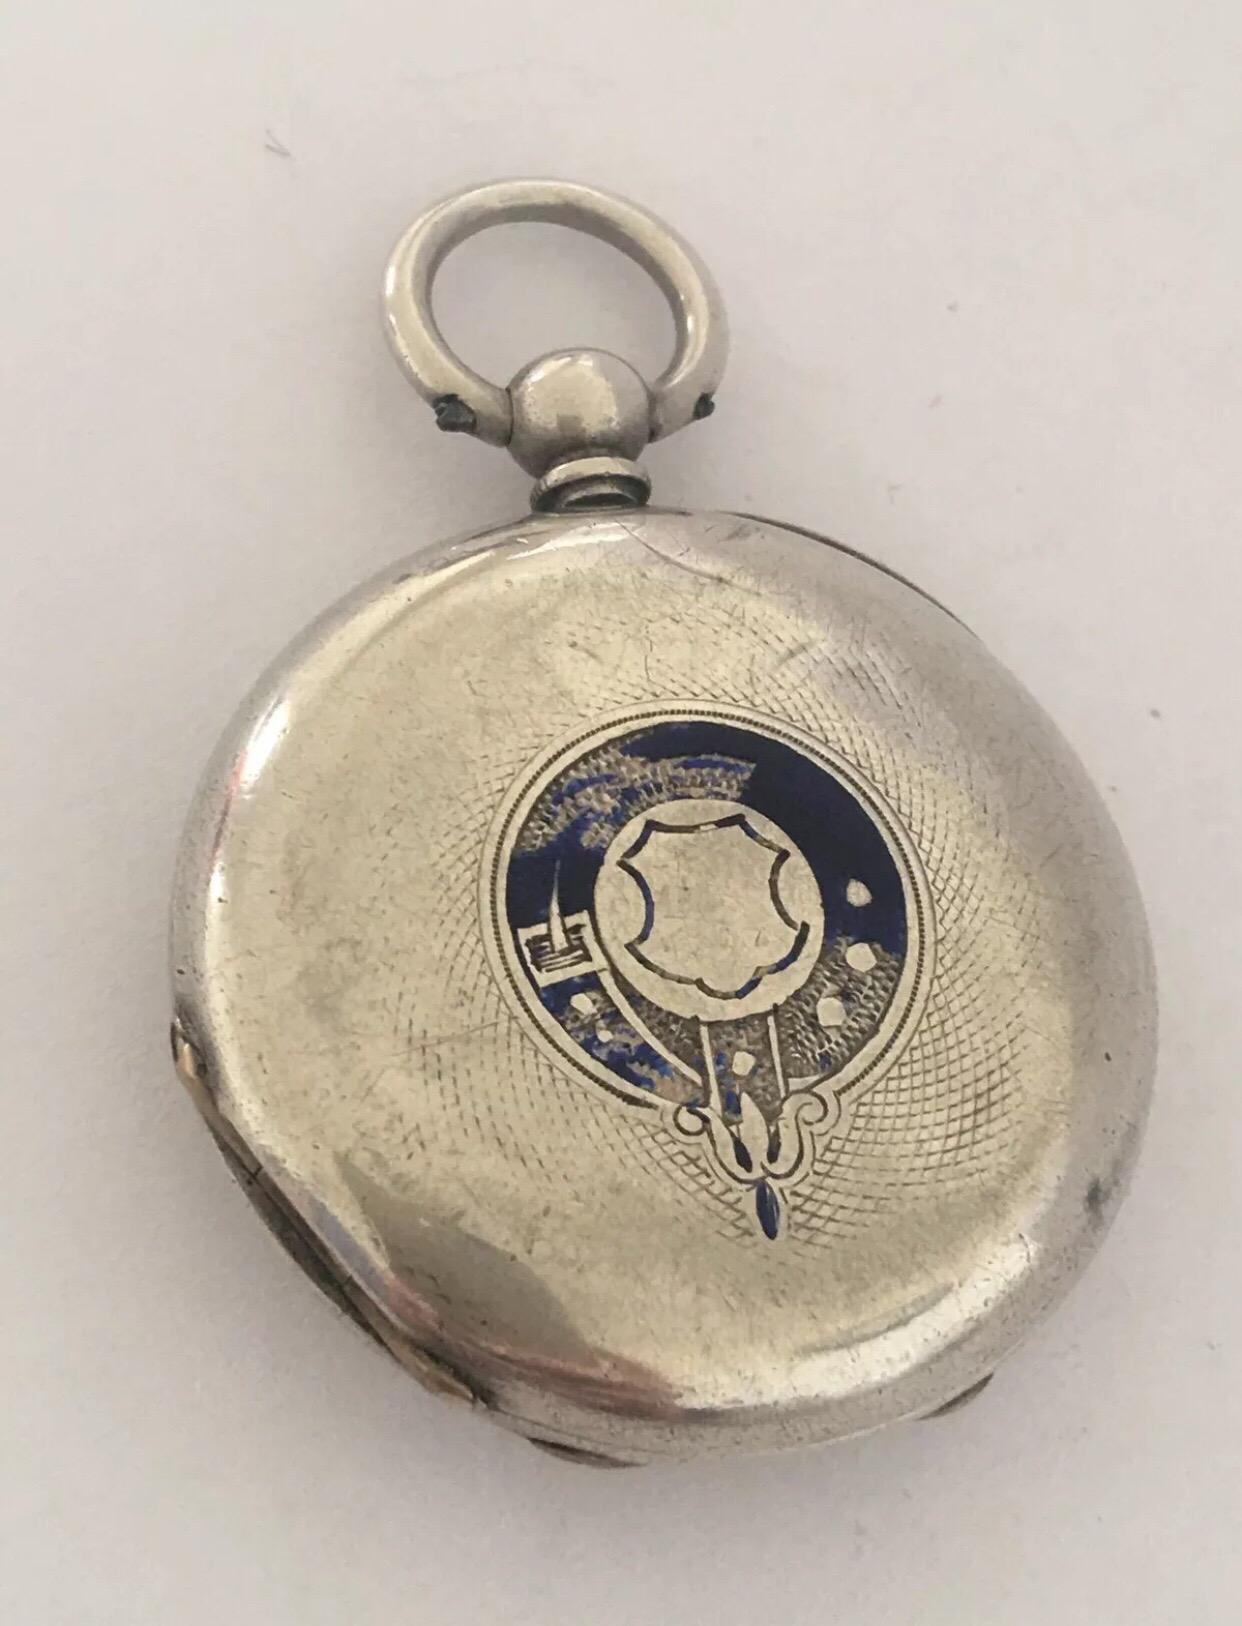 Antique Key-wind Silver Half Hunter Pocket Watch.


This beautiful 42mm diameter key winding silver half hunter pocket watch is in good working condition and is ticking well. Visible signs of ageing and wear with light surface marks on the case and